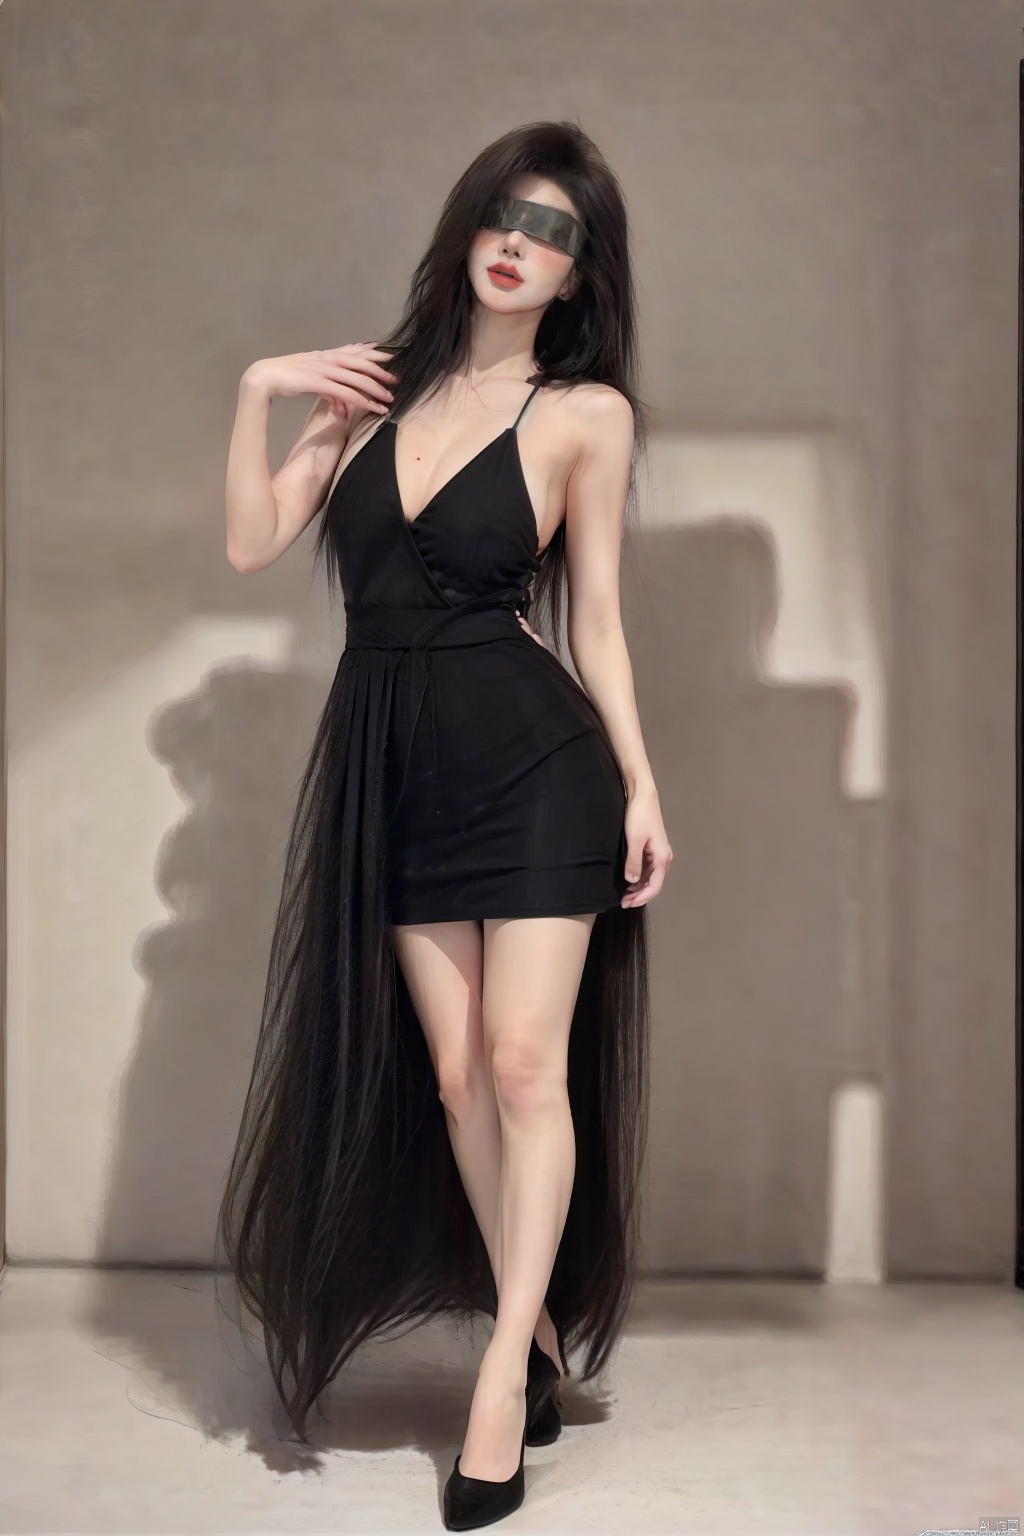  ((Best Quality)), ((Masterpiece)), (Very detailed:1.3), 3D, 1 girl,solo,(((full body))),J elegant asian woman in a black Mosaic dress,dance, Fairy, crystal, jewels,Crystal clear,eyeshadow,,dynamic pose,(the skirt sways with the wind:1.2),(skirt_hold:1.2),,high heels,Charming eyes,sideways_glance,exquisite facial features,slim legs,graceful yet melancholic posture,full shot,dutch angle,from_side,medium_shot,soft lighting,dramatic,perfect lighting,simple_background,(masterpiece, realistic, best quality, highly detailed, Ultra High Resolution, Photo Art, profession,cinematic_angle),plns,sw,1girl, dress,nature,colorful, HDR (high dynamic range), ray tracing, nvidia RTX, super resolution, Unreal 5, subsurface scattering, PBR texture, post-processing, anisotropic filtering, depth of field, Maximum sharpness and sharpness, multi-layered textures, albedo and highlight maps, surface shading, accurate simulation of light-material interactions, perfect ratios, octane rendering, duotone lighting, low ISO, white balance, rule of thirds, wide aperture, 8K RAW, efficient sub-pixels, subpixel convolution, luminous particles, dynamic pose, blindfold, 
